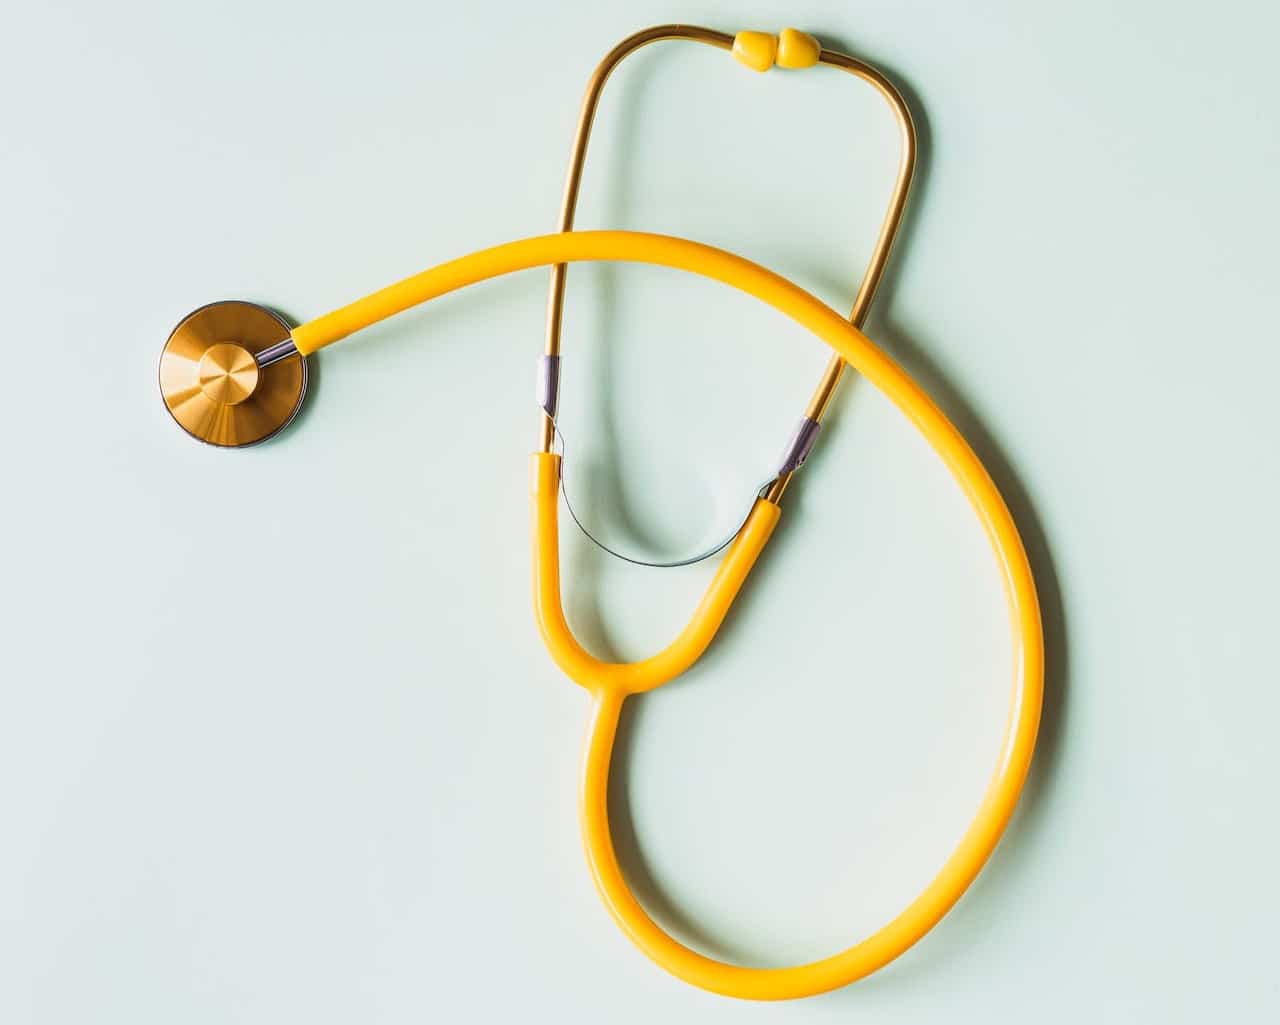 A yellow stethoscope on a light background, highlighting essential medical equipment.